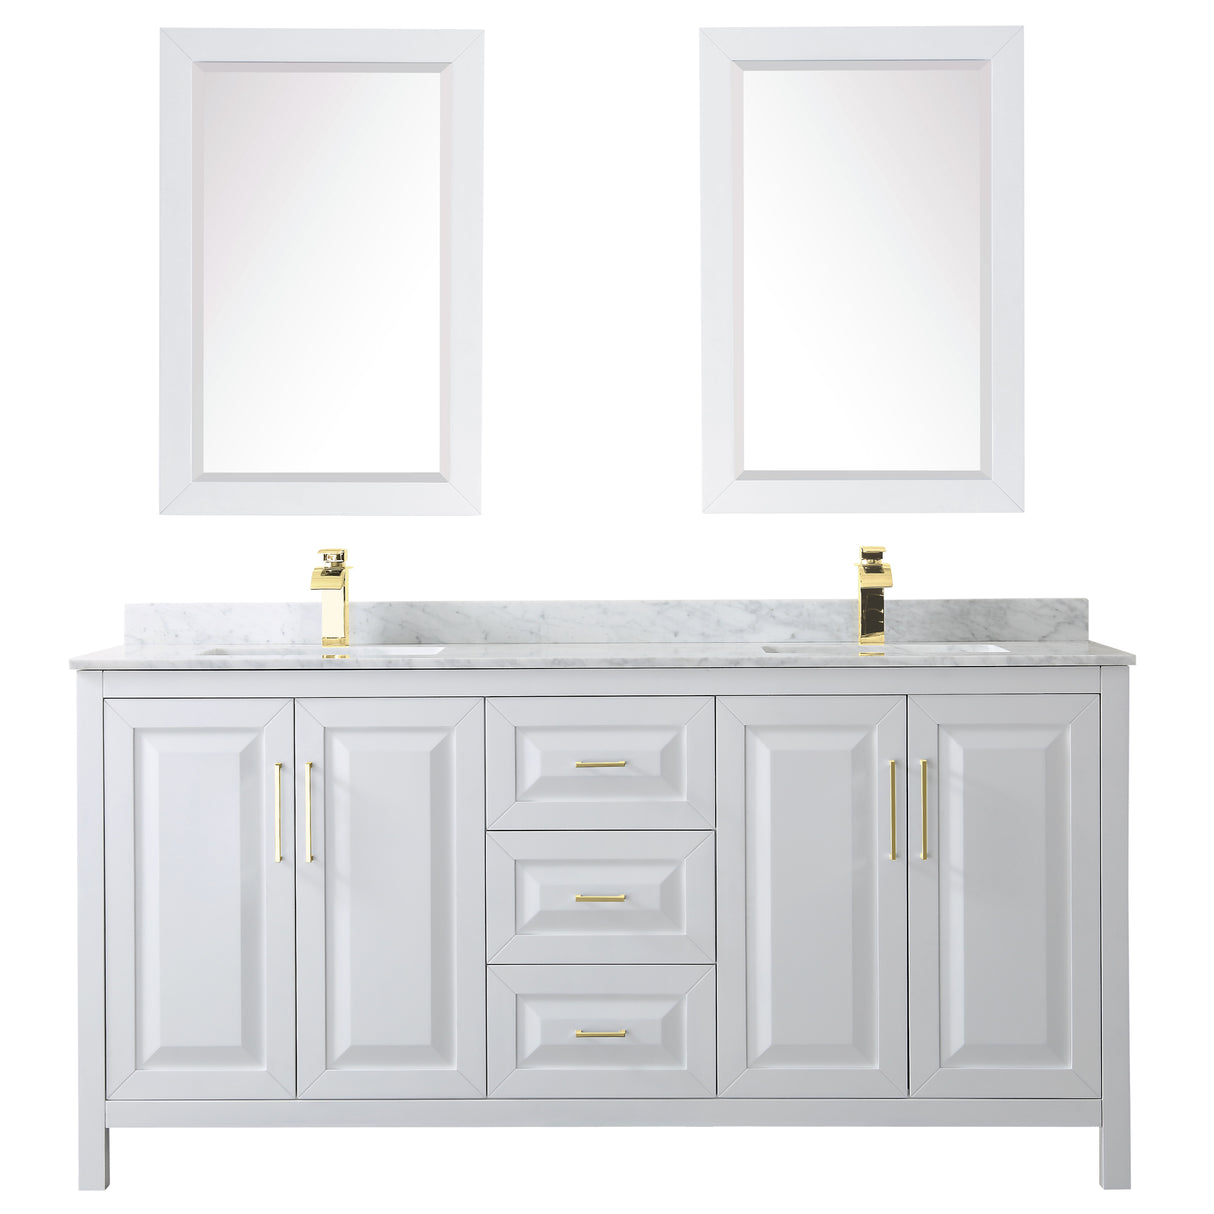 Daria 72 Inch Double Bathroom Vanity in White White Carrara Marble Countertop Undermount Square Sinks 24 Inch Mirrors Brushed Gold Trim